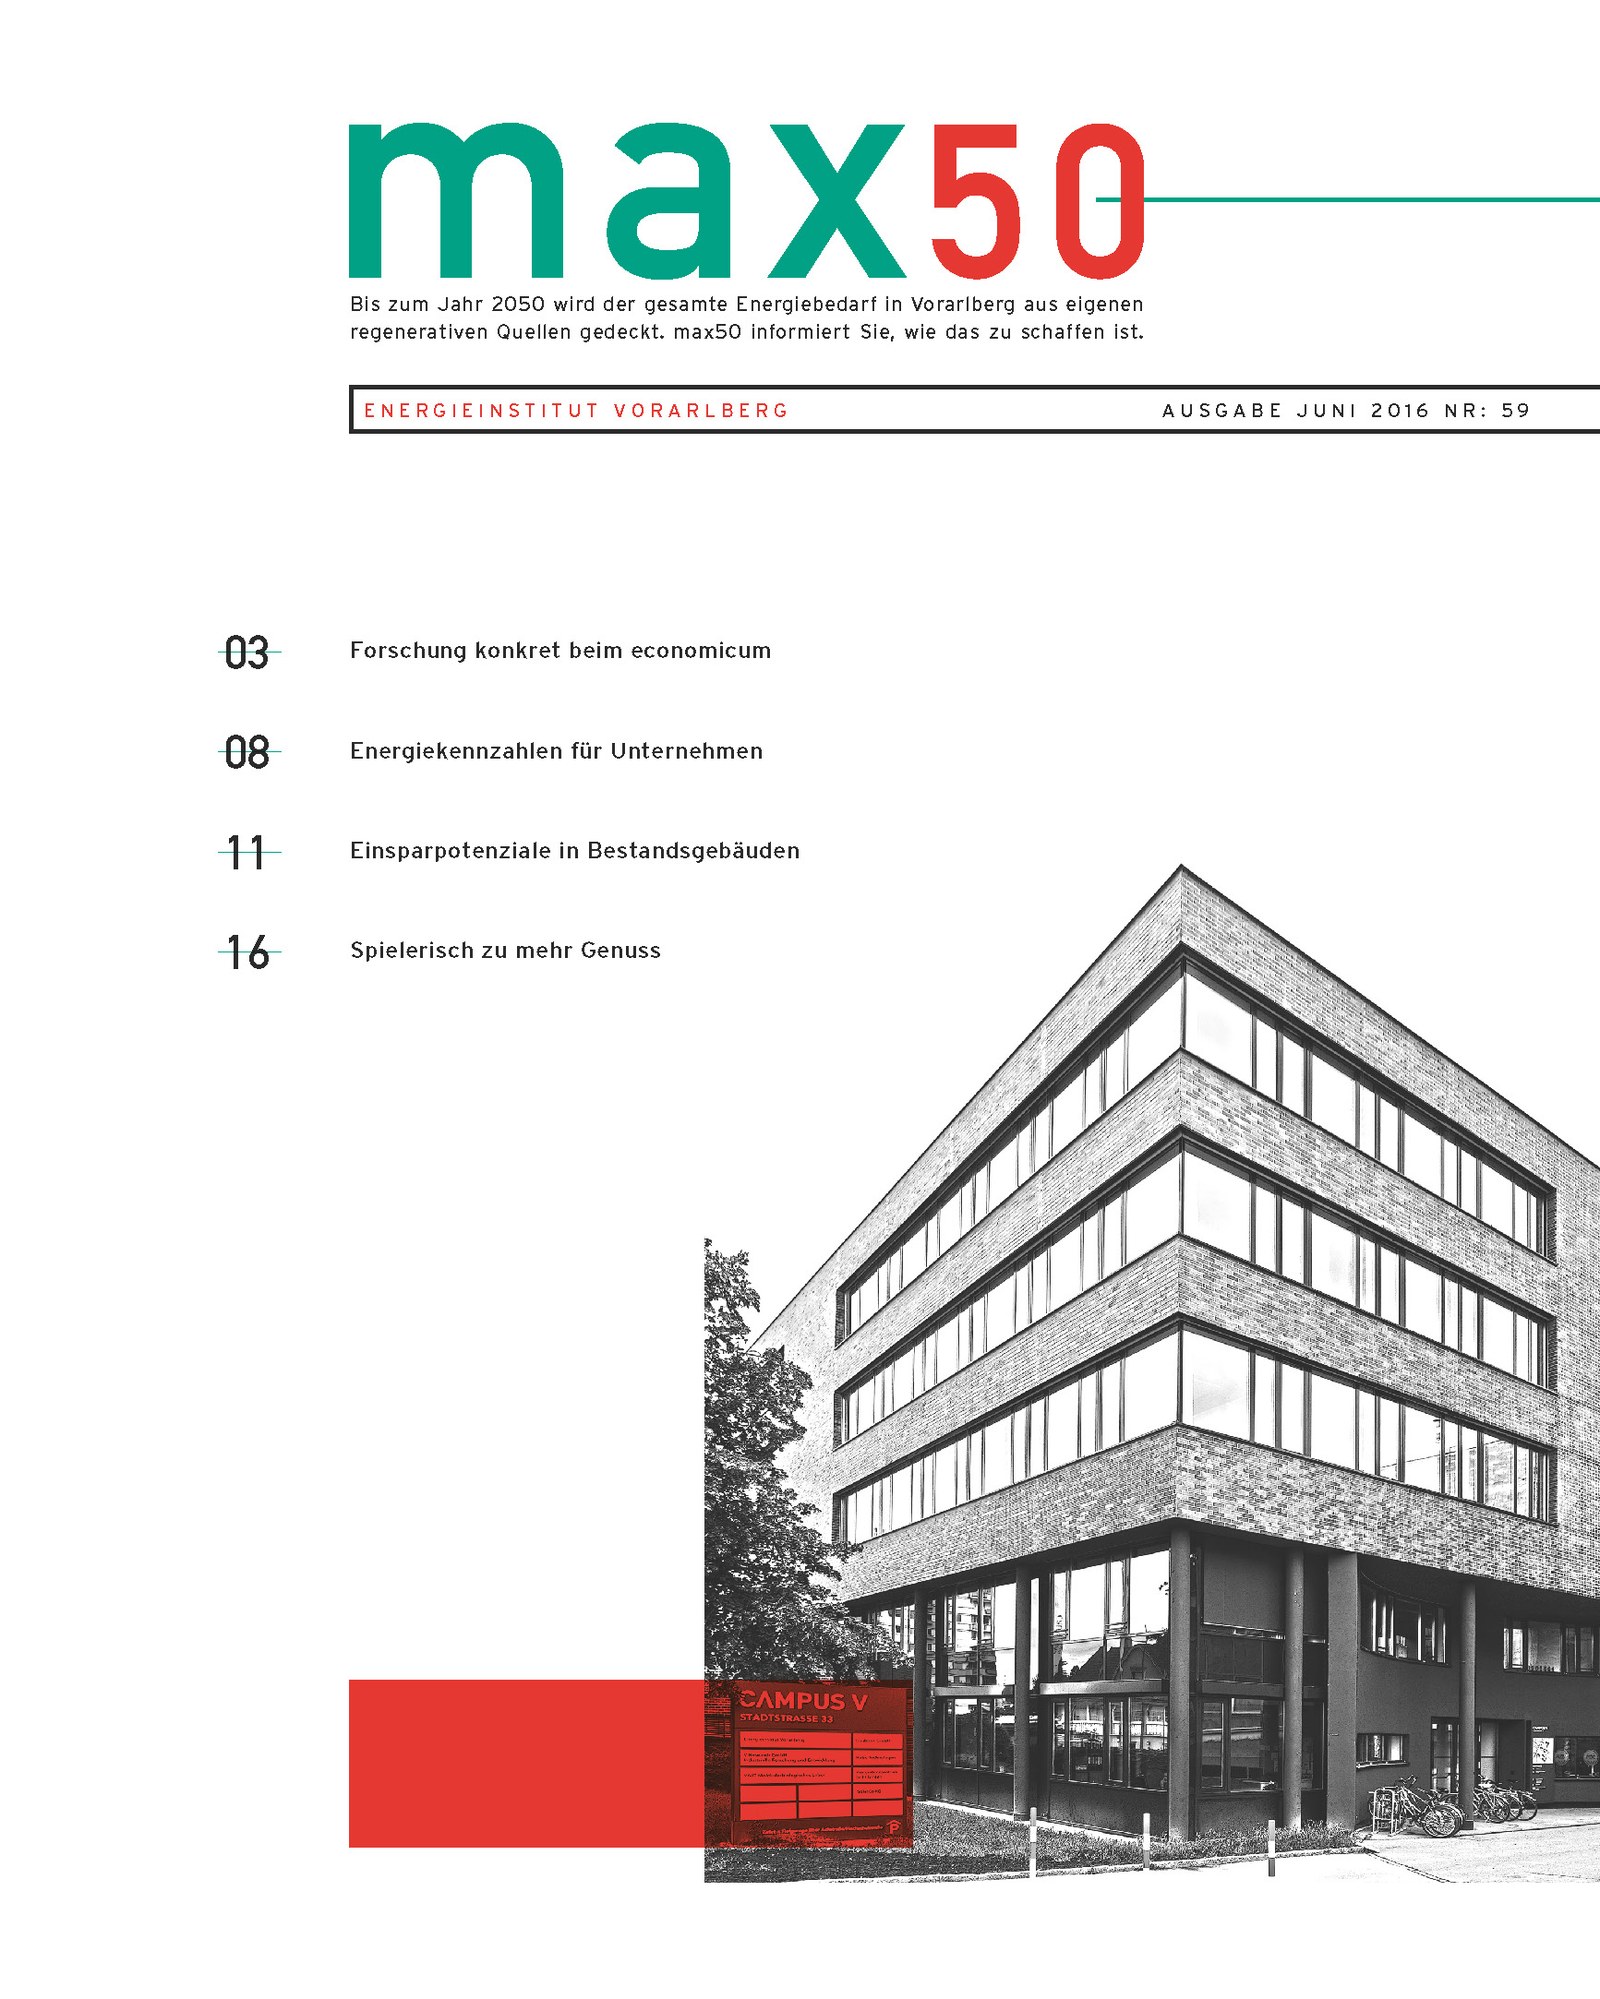 max50_Nr59_Cover